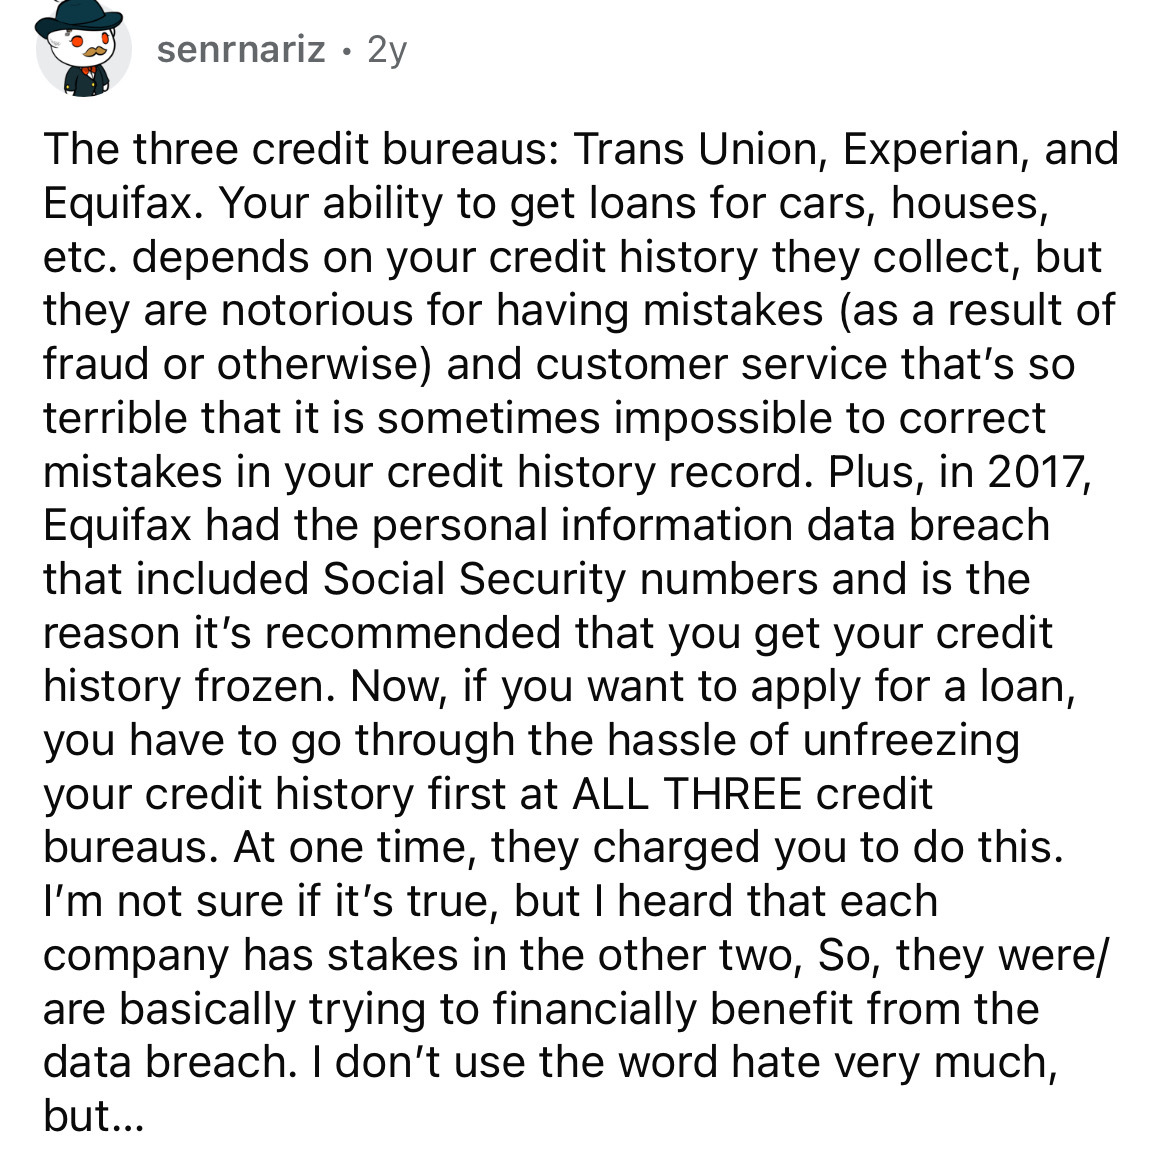 document - senrnariz 2y . The three credit bureaus Trans Union, Experian, and Equifax. Your ability to get loans for cars, houses, etc. depends on your credit history they collect, but they are notorious for having mistakes as a result of fraud or otherwi